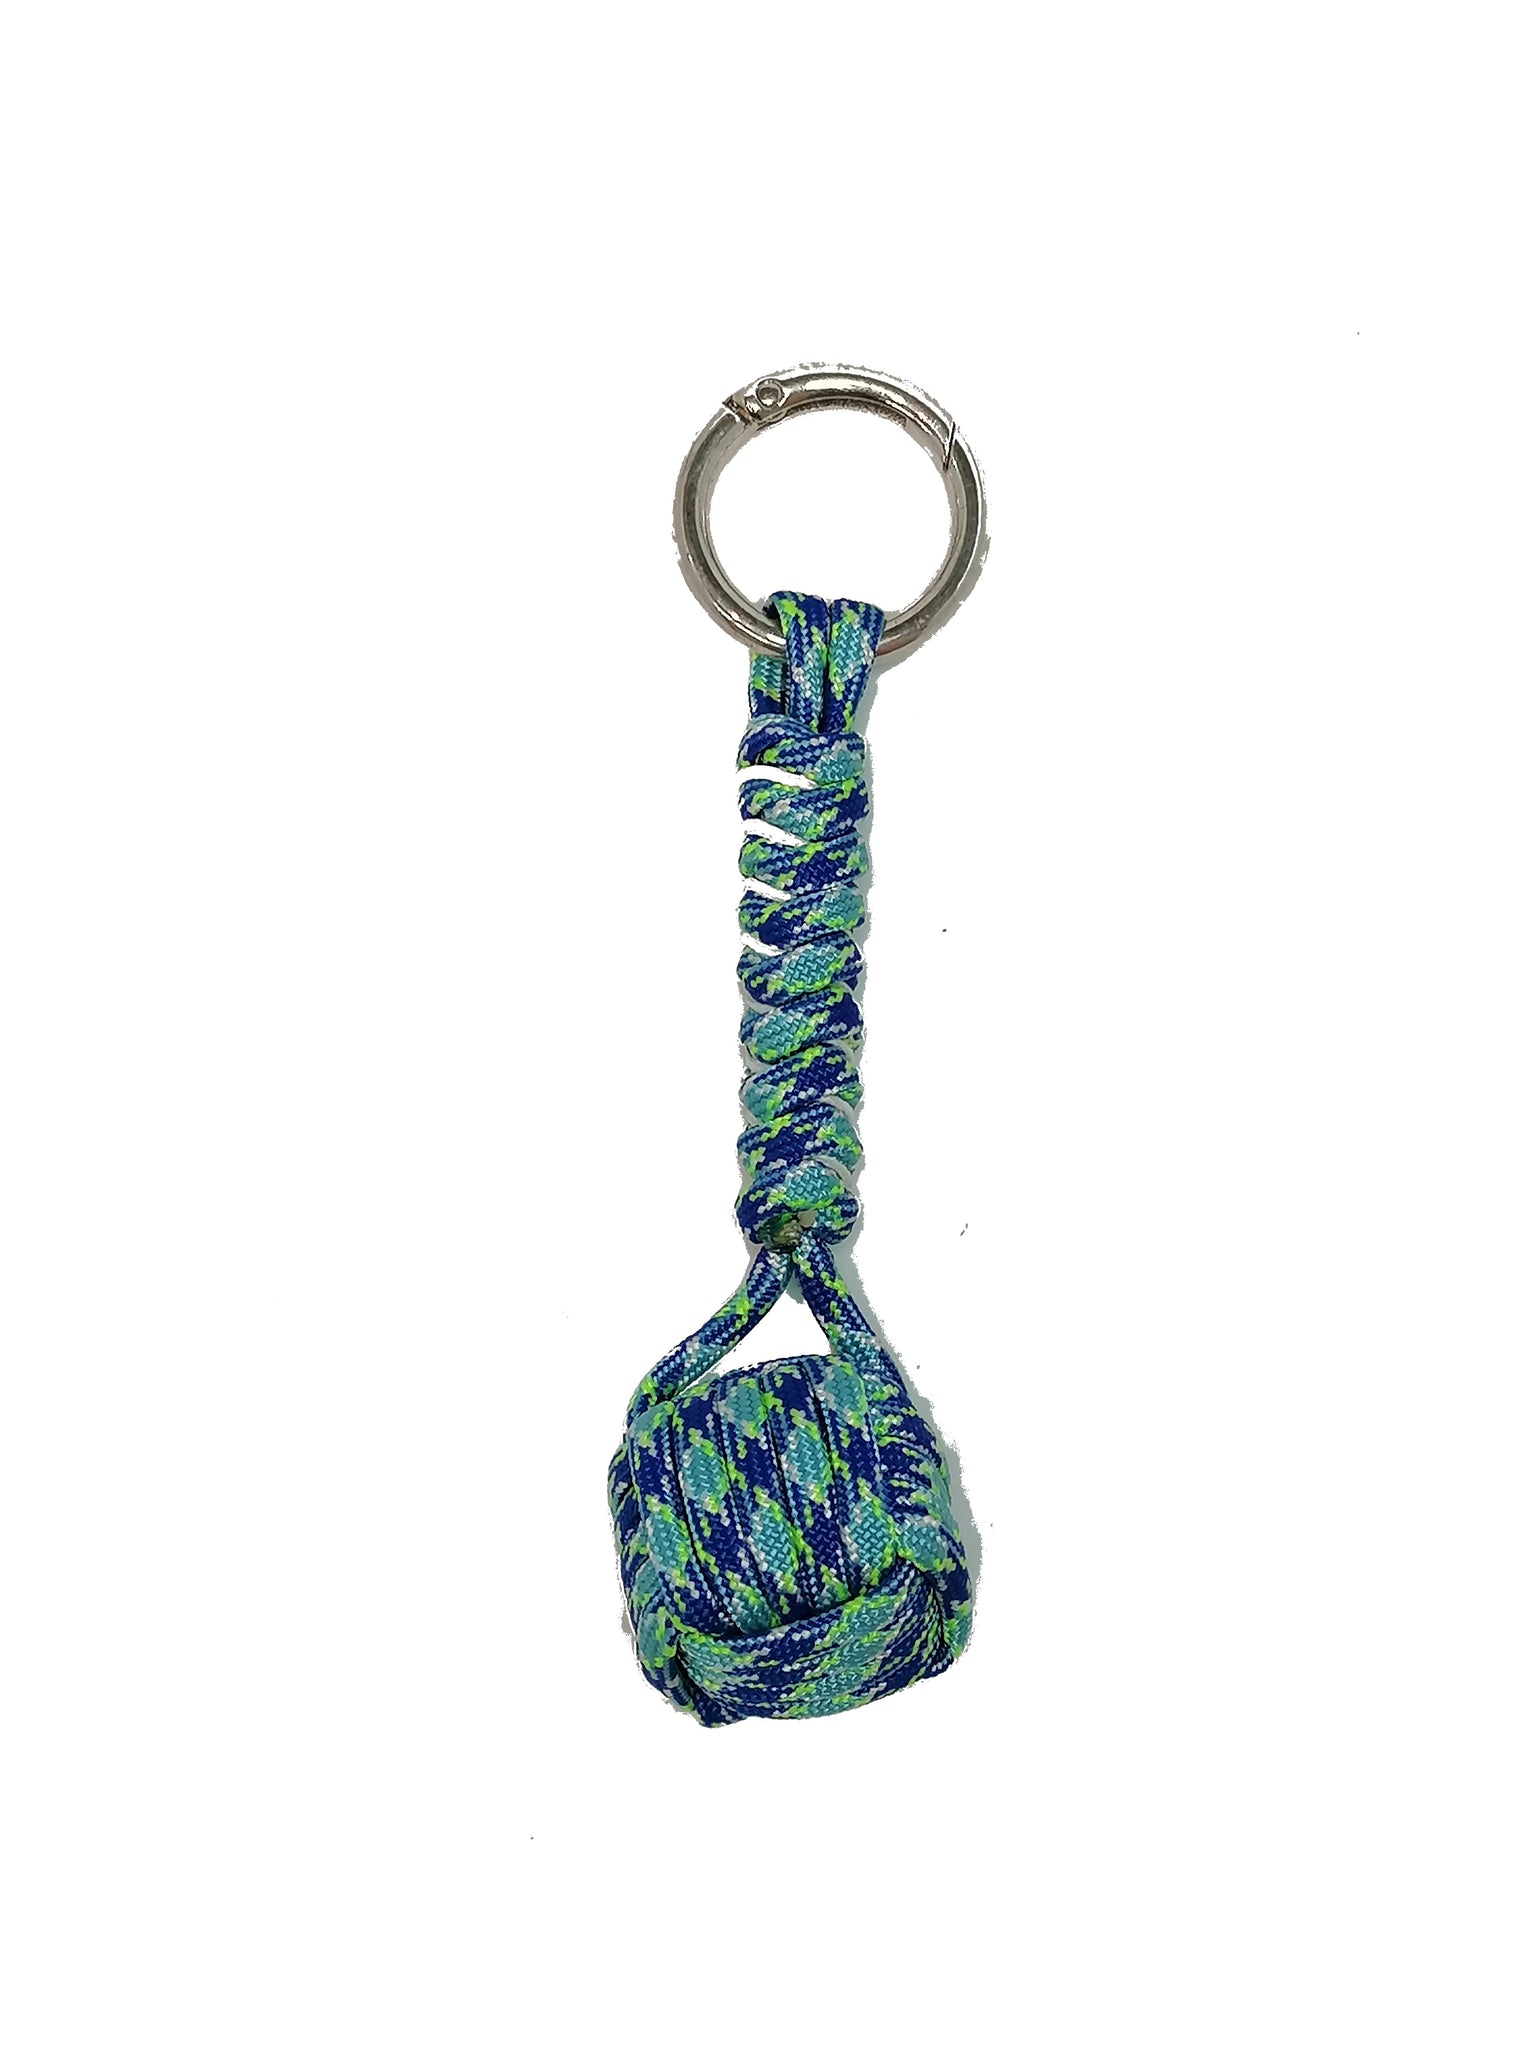 SQUARE MONKEYFIST KEYFOB HAND MADE FROM PARACORD (GREEN-BLUE)